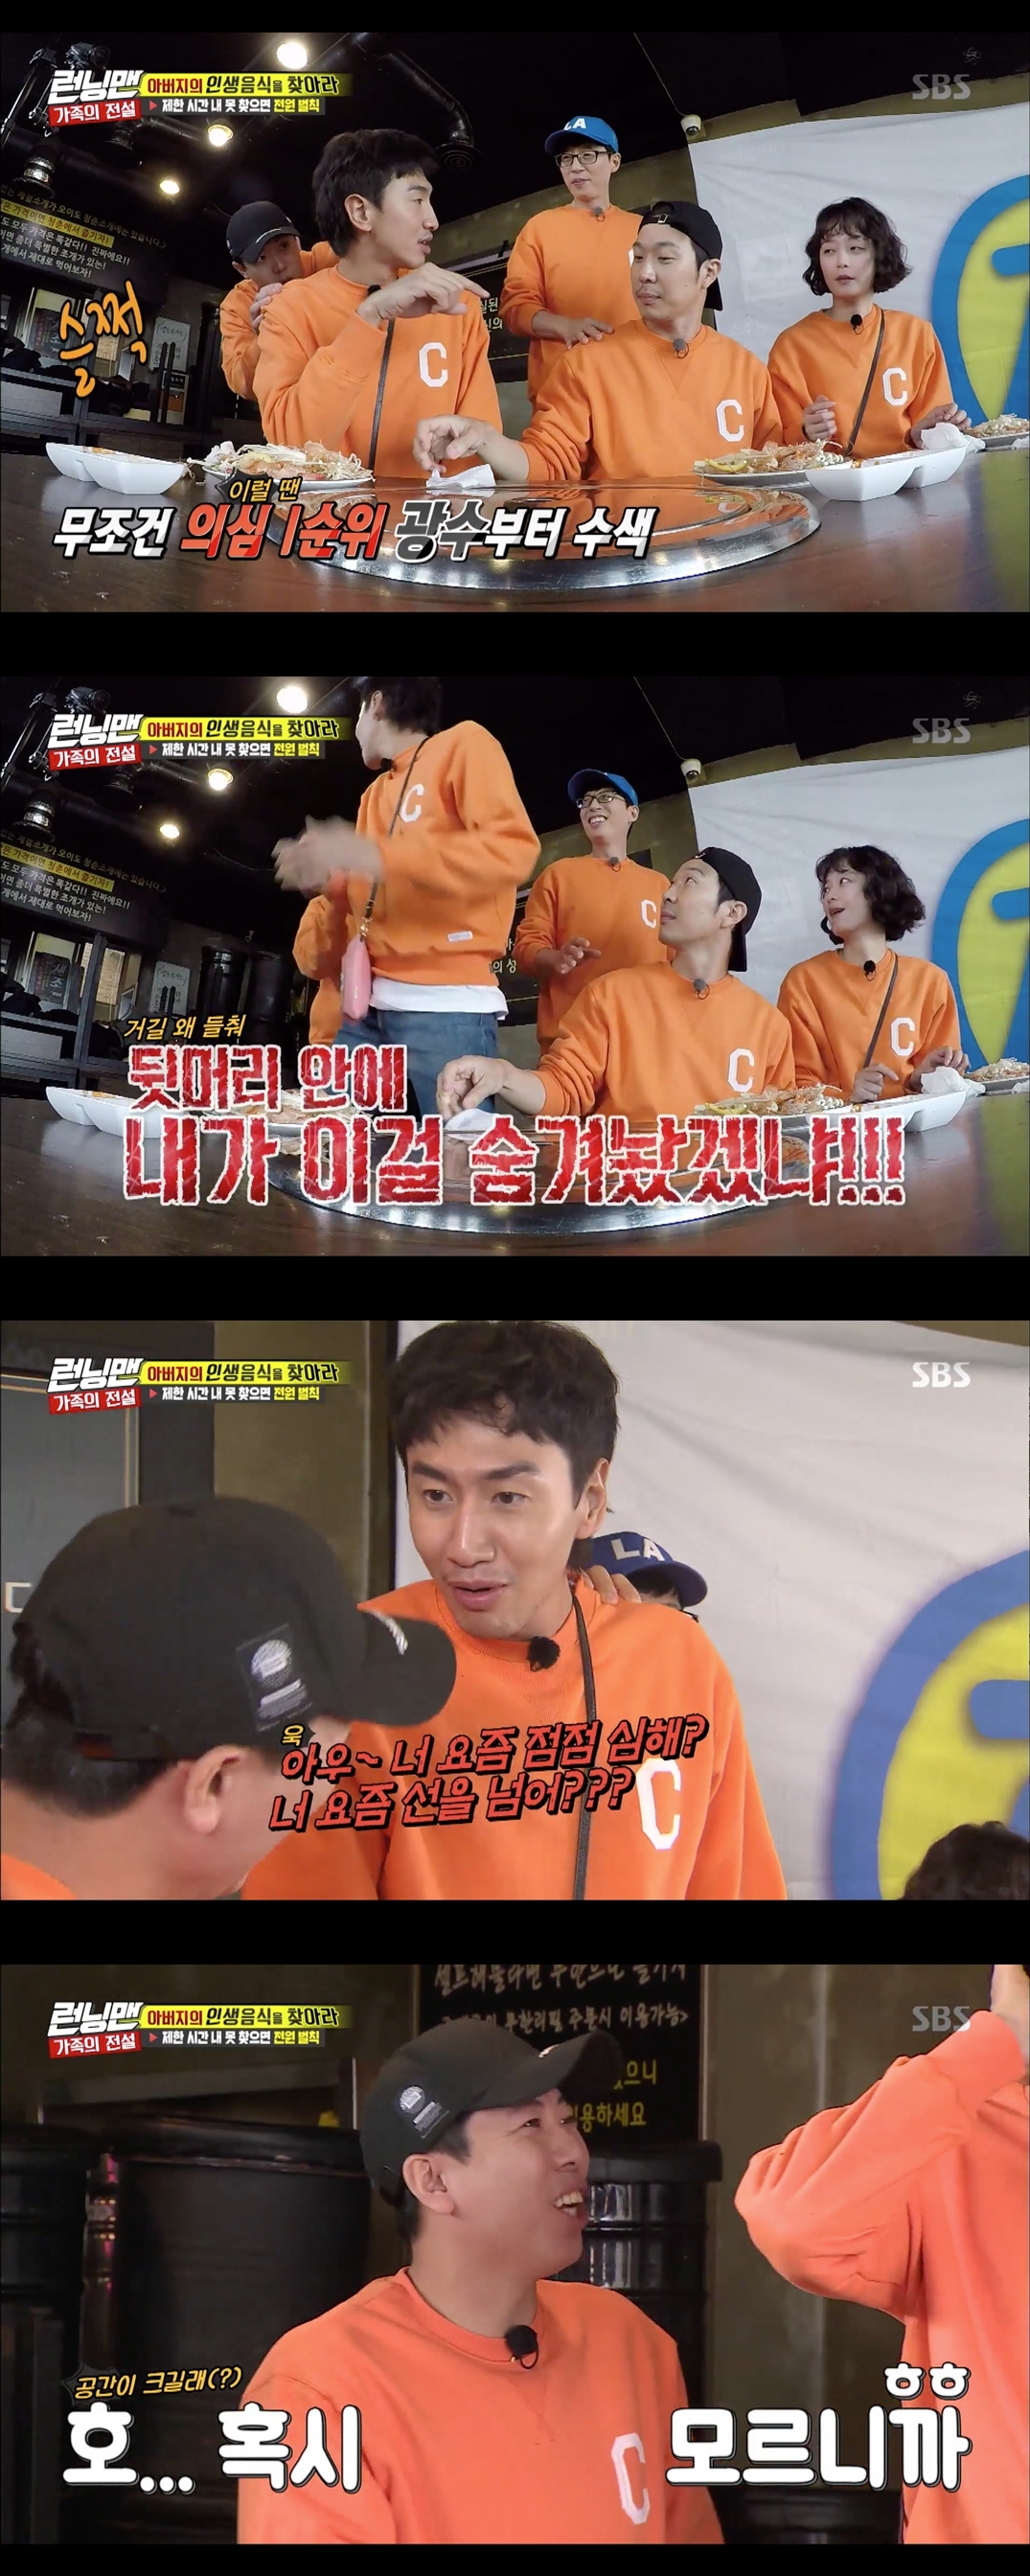 Seoul = = Running Man Lee Kwangsoo laughed when he warned Yang Se-chan that he was over the line.SBS Running Man, which was broadcast on the 11th, was packed with 8 Brother and Sister Race Family Legend, where 8 members turned into 8 Brother and Sister and spread family race.On the day, Blunder Guest actor Kim Byeong-ok appeared in the video; Kim Byeong-ok appeared as the members father and directed the mission.The eight members carried out a series of missions to find life food directed by their father Kim Byeong-ok.The members pointed out For this as the first food, but it was not the right answer, and they had to eat For this in the decreasing mission execution time so that they could move to the next mission.While eating For this deliciously, Haha surprised everyone with a unofficial mission hidden on his plate.Among them, Yang Se-chan started to search for the mission by touching the back of Kwangsoos head, and Kwangsoo was angry at it, saying, I would have hidden this in the back of the head. You are getting worse these days, beyond the line these days.Yang Se-chan quivered numbly, saying: I dont know if.Meanwhile, Running Man is broadcast every Sunday at 4:50 pm on SBS.